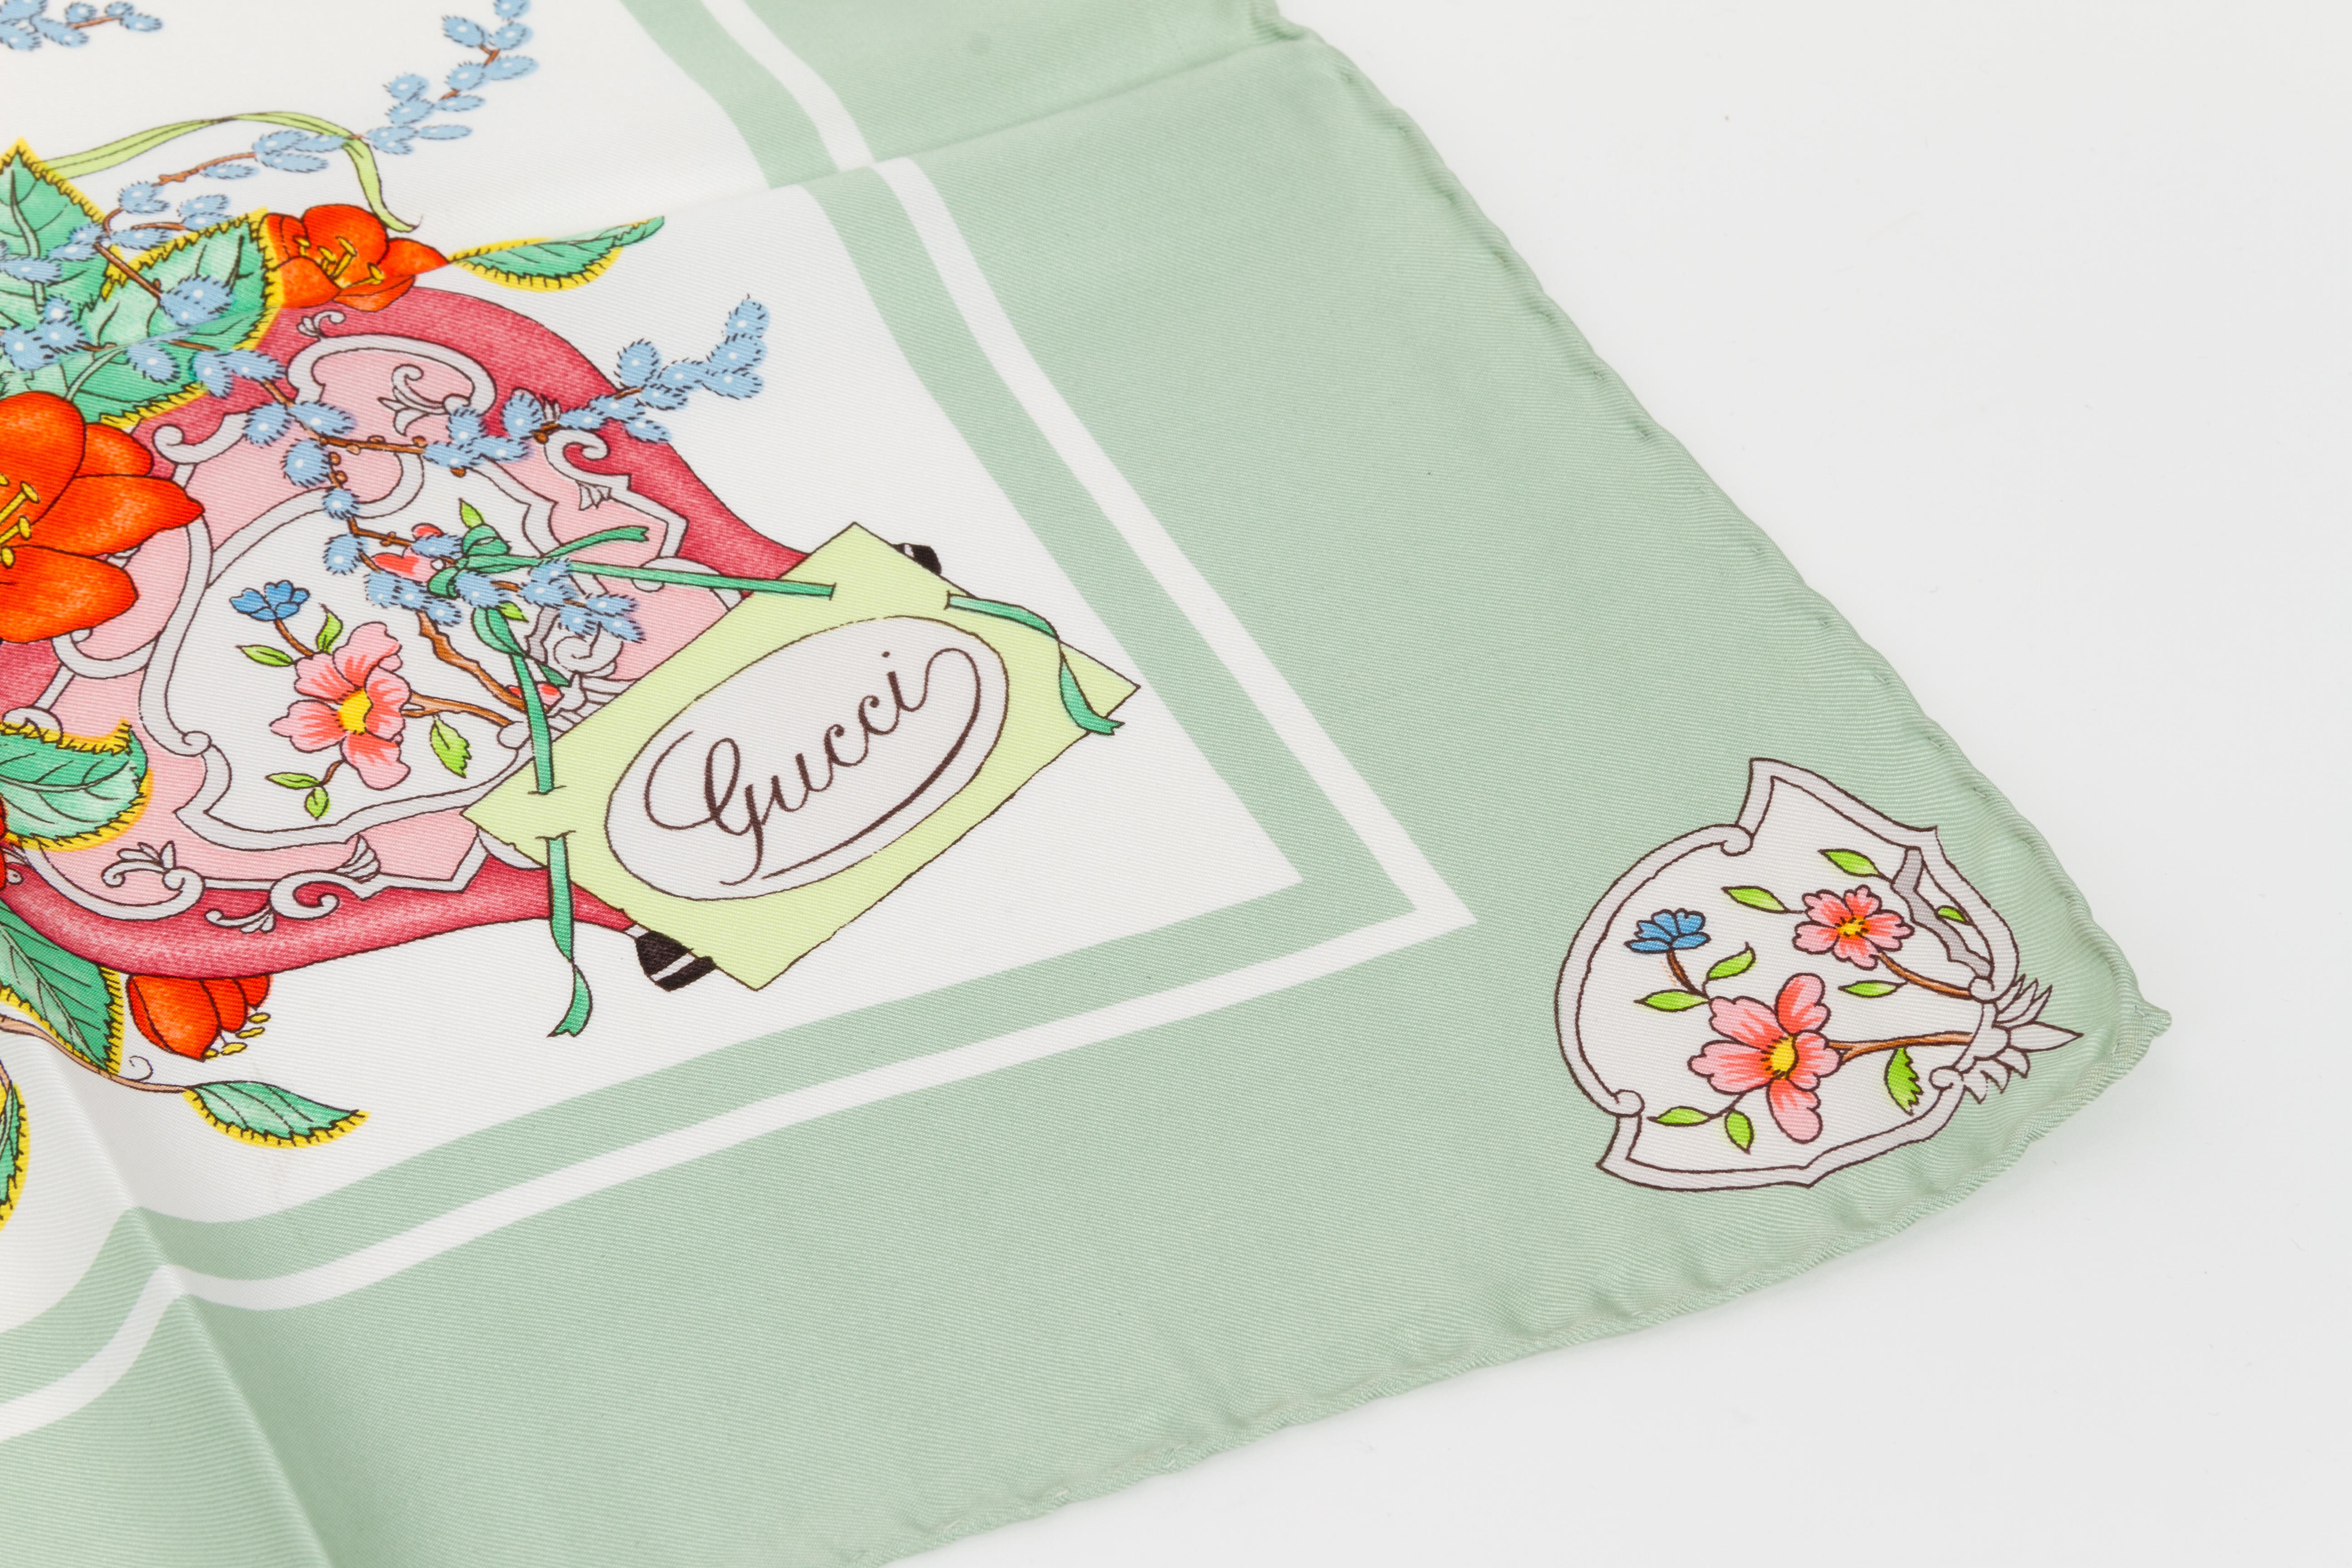 Gucci silk twill floral scarf with a sea foam border and hand-rolled edges. Accornero original and collectible design. Does not include box. Minor wear.